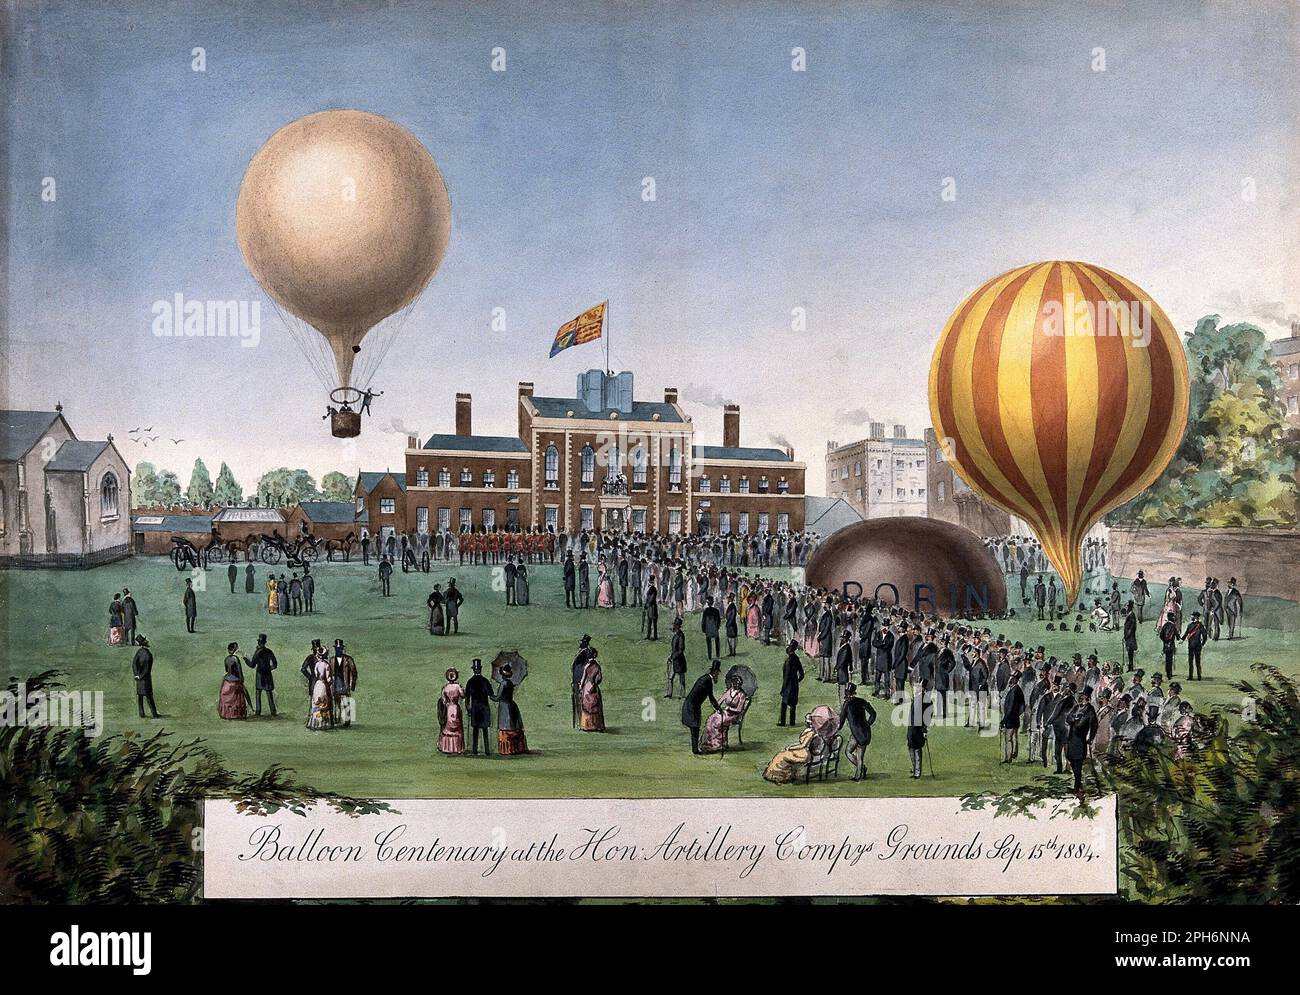 Balloon Centenary at the Honourable Artillery Company Grounds London, vintage colour illustration from 1884 Stock Photo